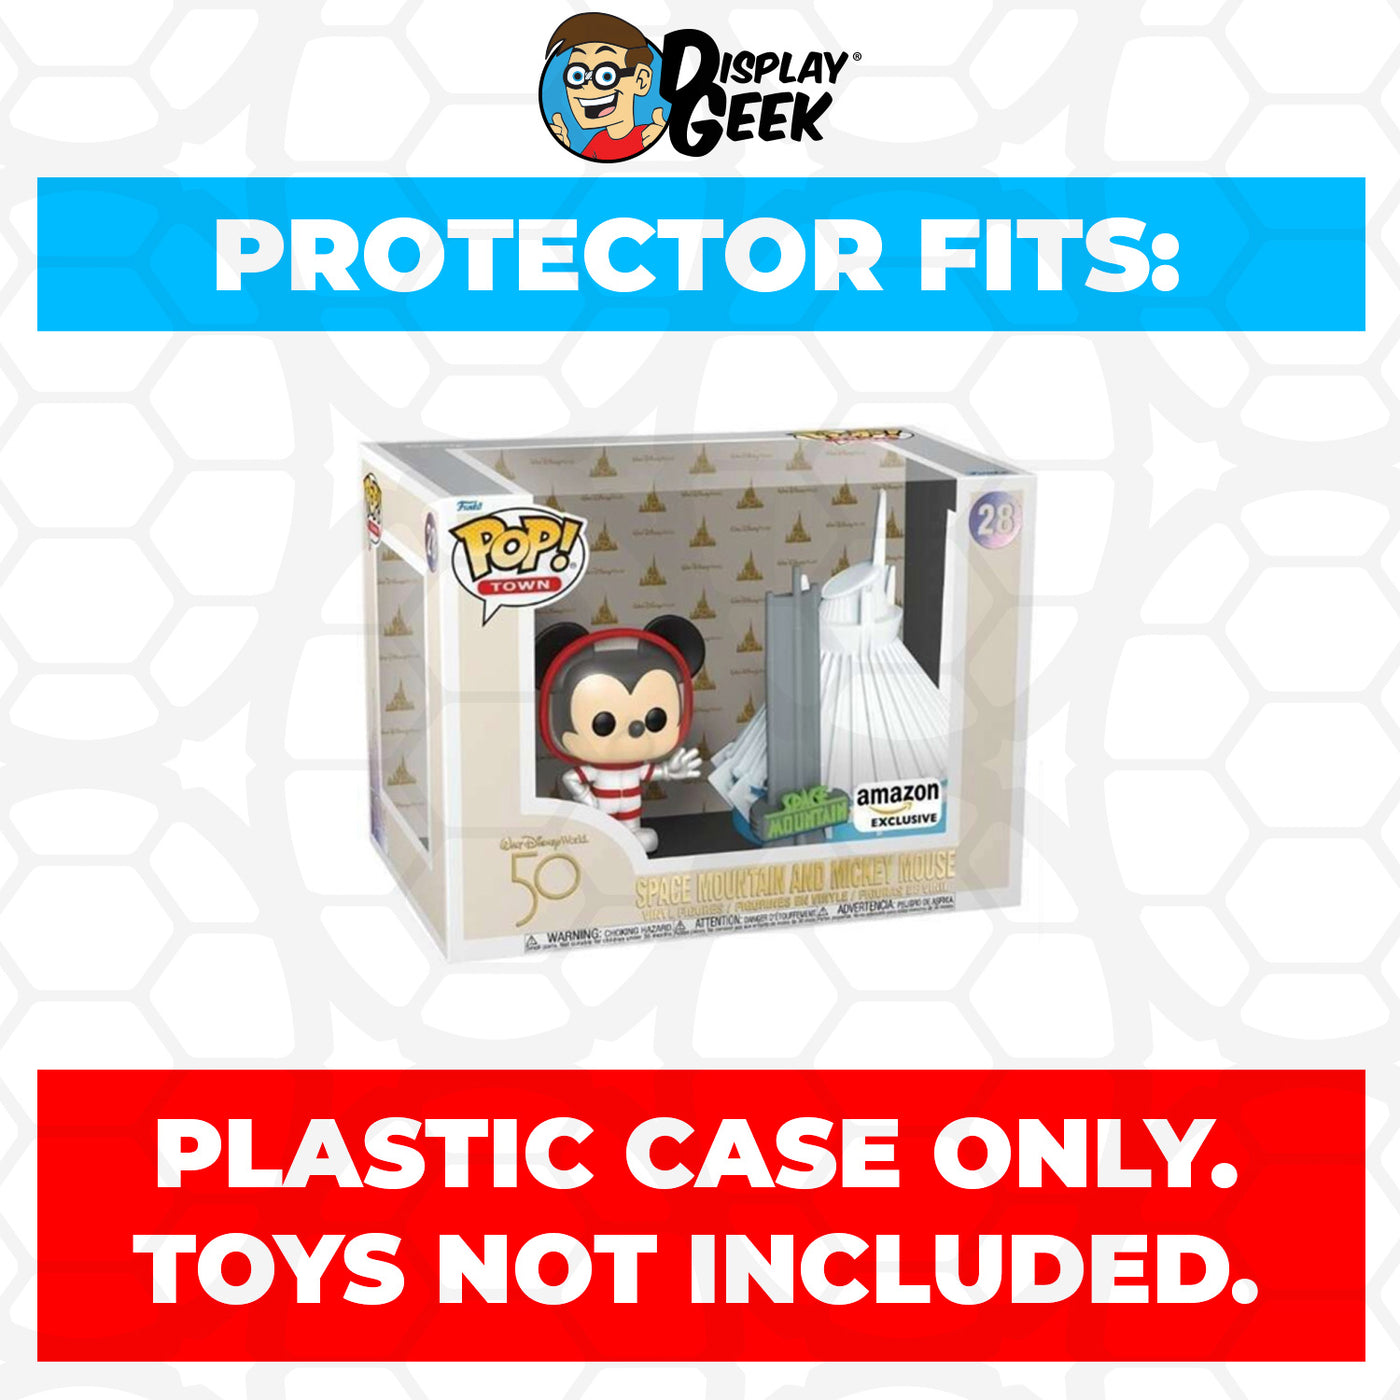 Pop Protector for Space Mountain and Mickey Mouse #28 Funko Pop Town on The Protector Guide App by Display Geek